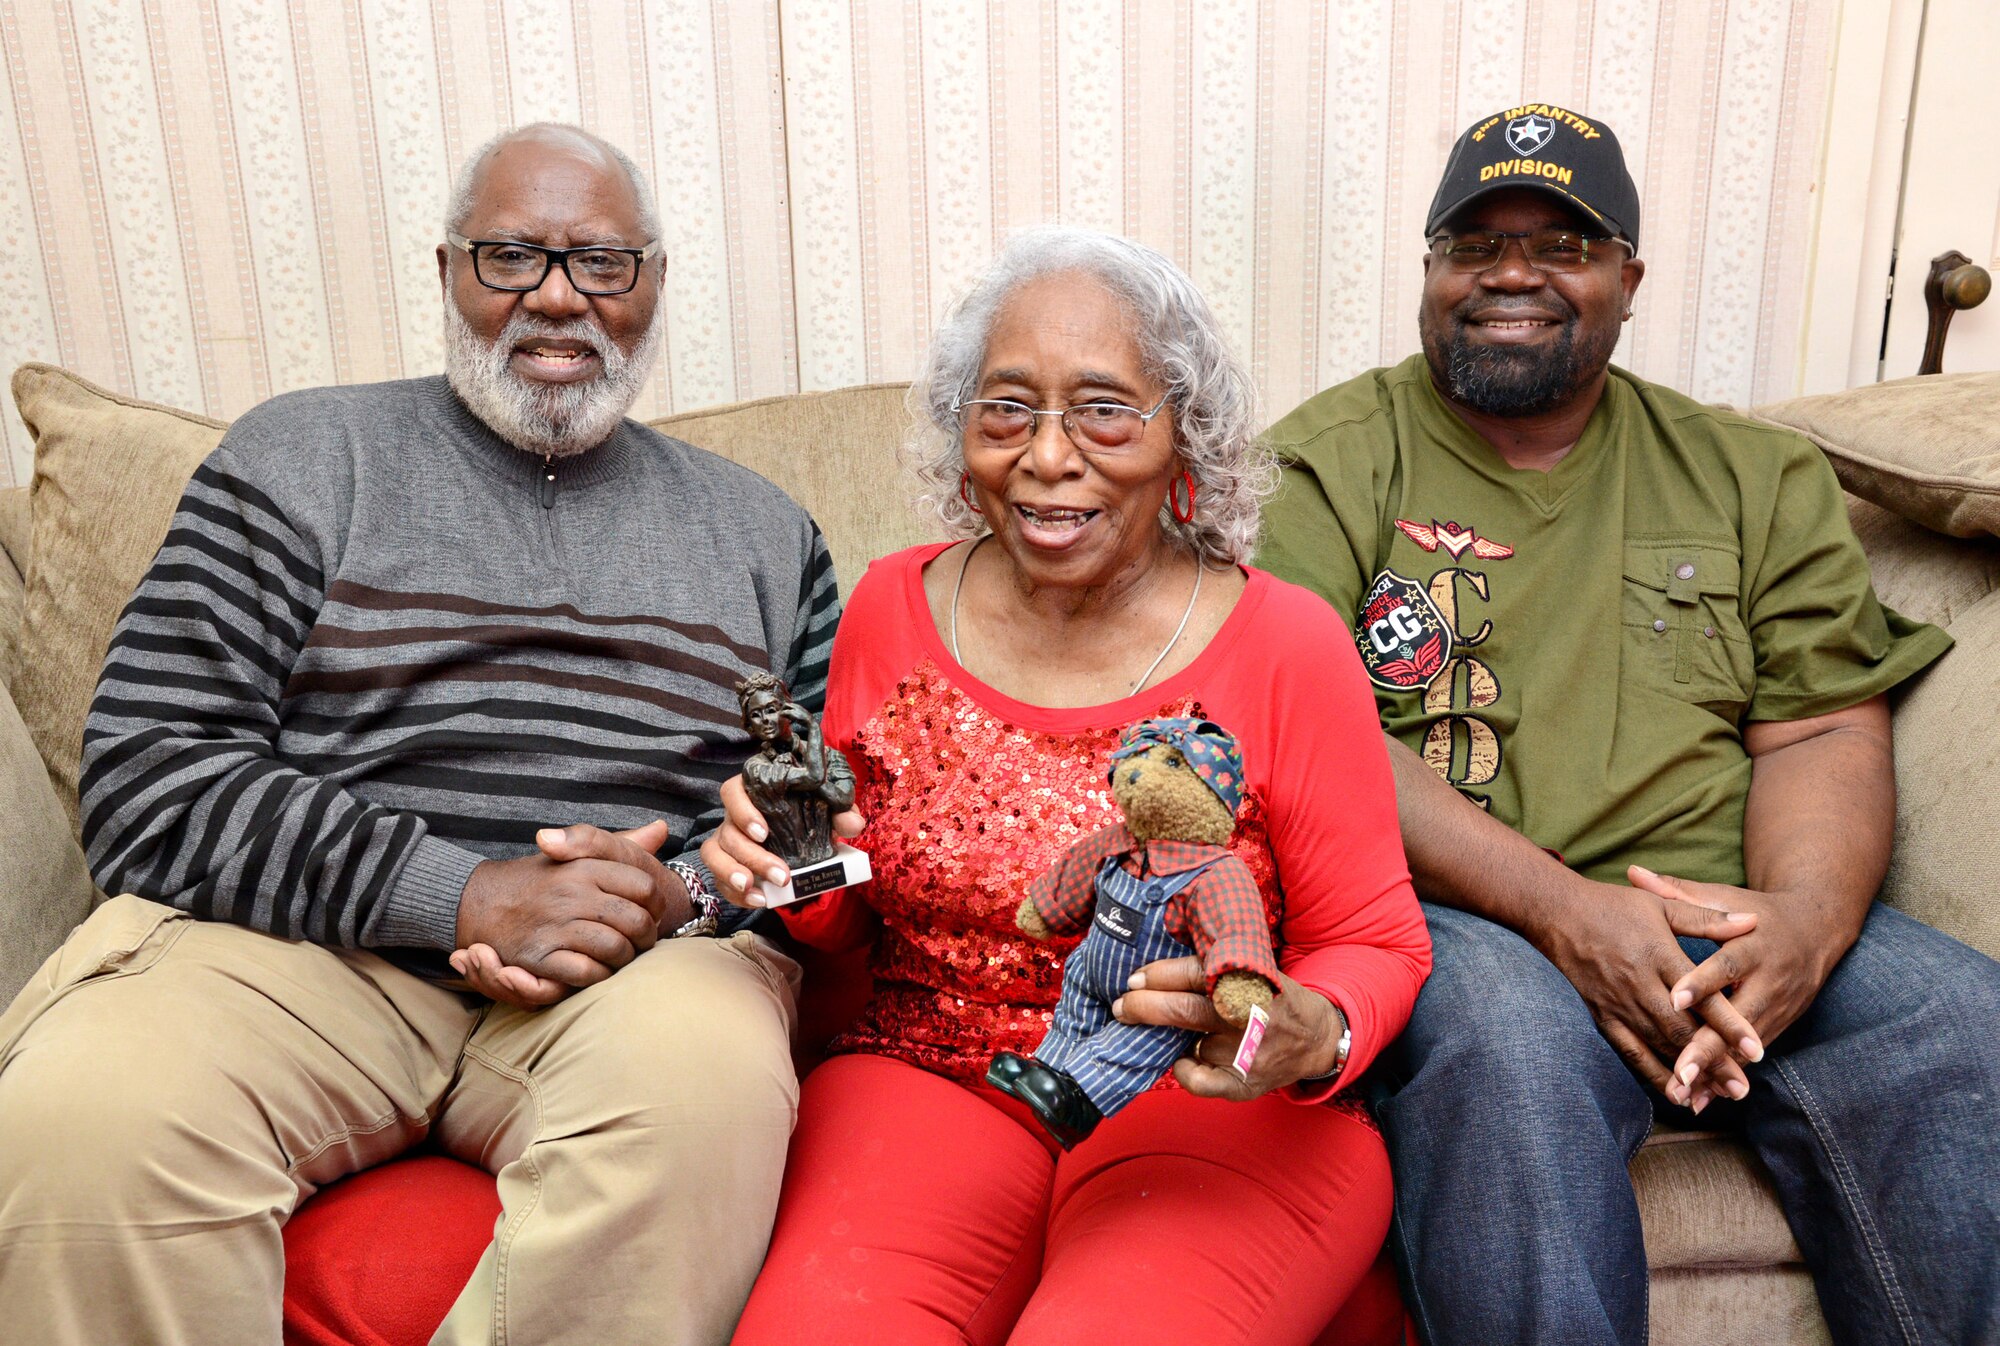 An original Rosie the Riveter, Eulila Davis, center, started her family’s civil service tradition in 1943 when Tinker Air Force Base was known as Douglas Field. With Ms. Davis are her son, Lloyd, left, and grandson, Steven, who both also worked at Tinker. (Air Force photo by Kelly White/Released)